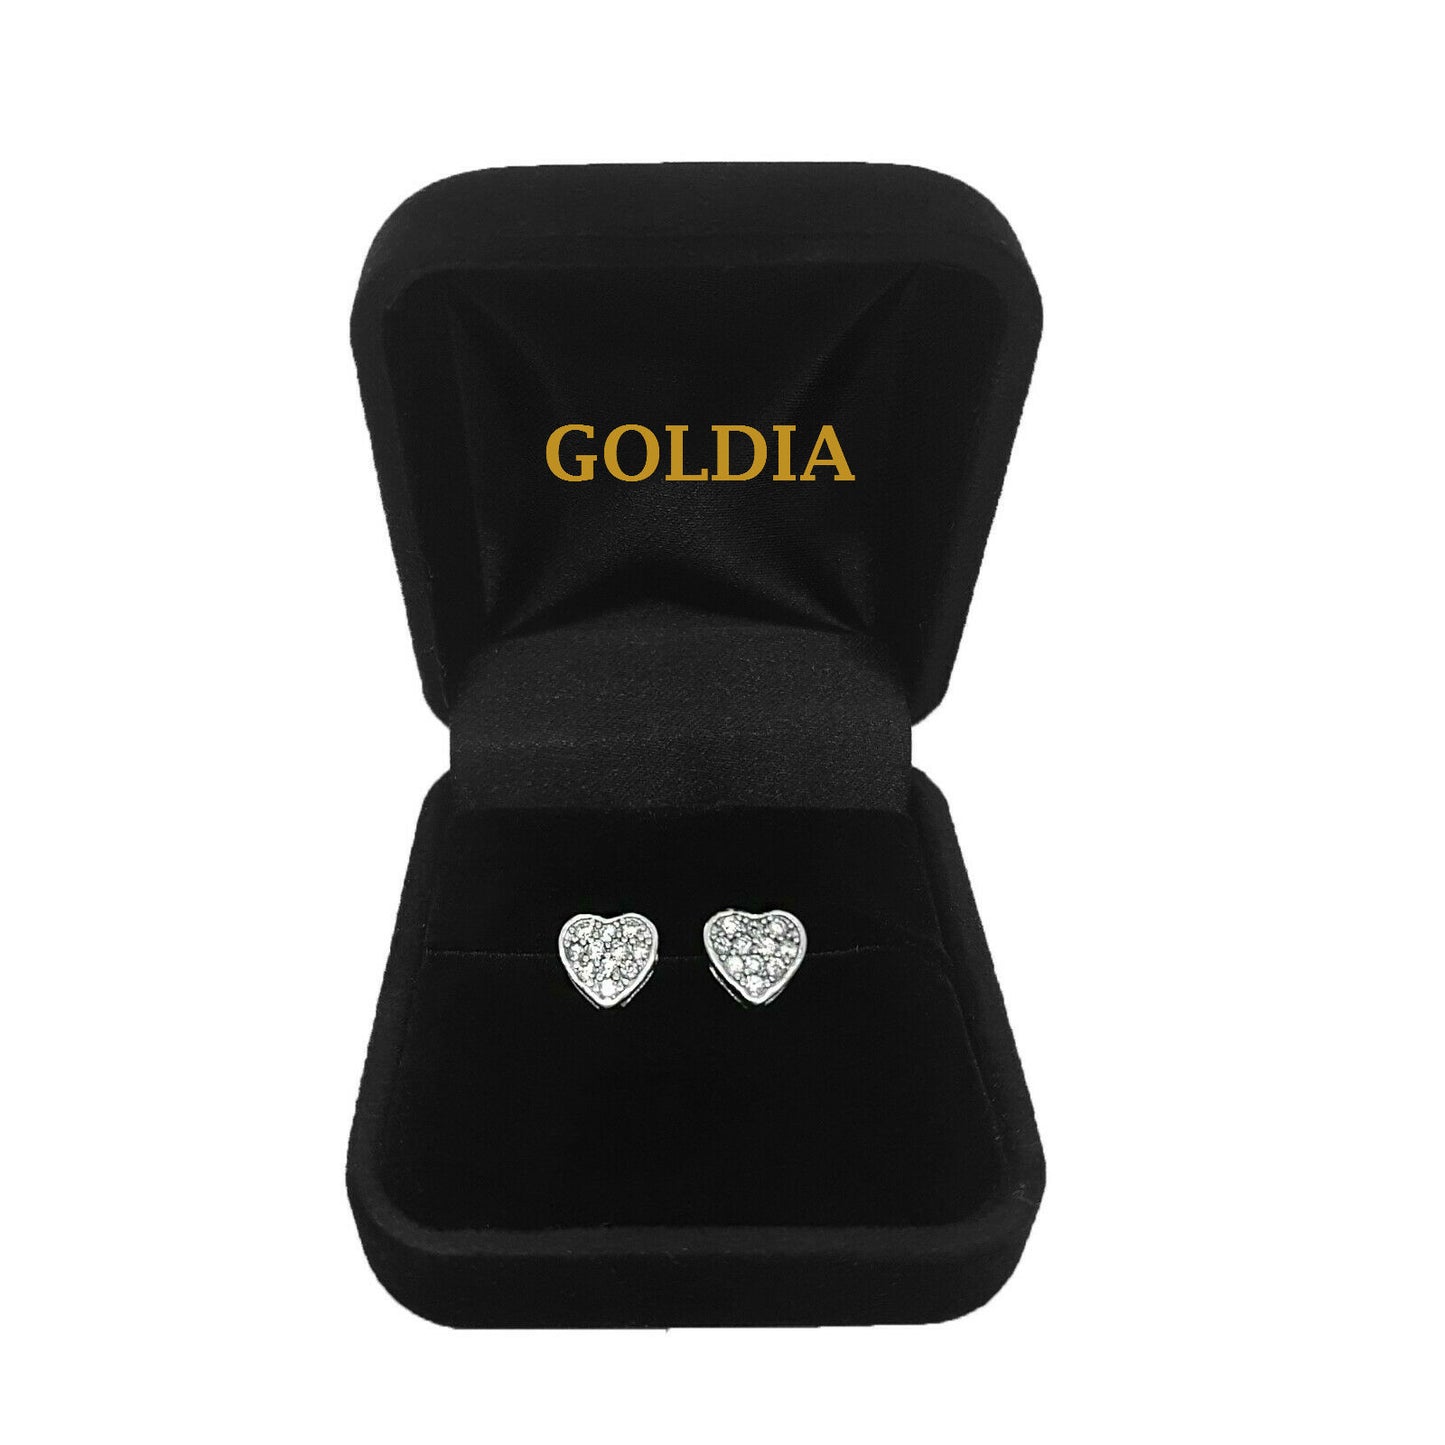 1/3 Carat TW AGS Certified Round Diamond Solitaire Stud Earrings in 14K White Gold (K/L Color - I1/I2 Clarity)